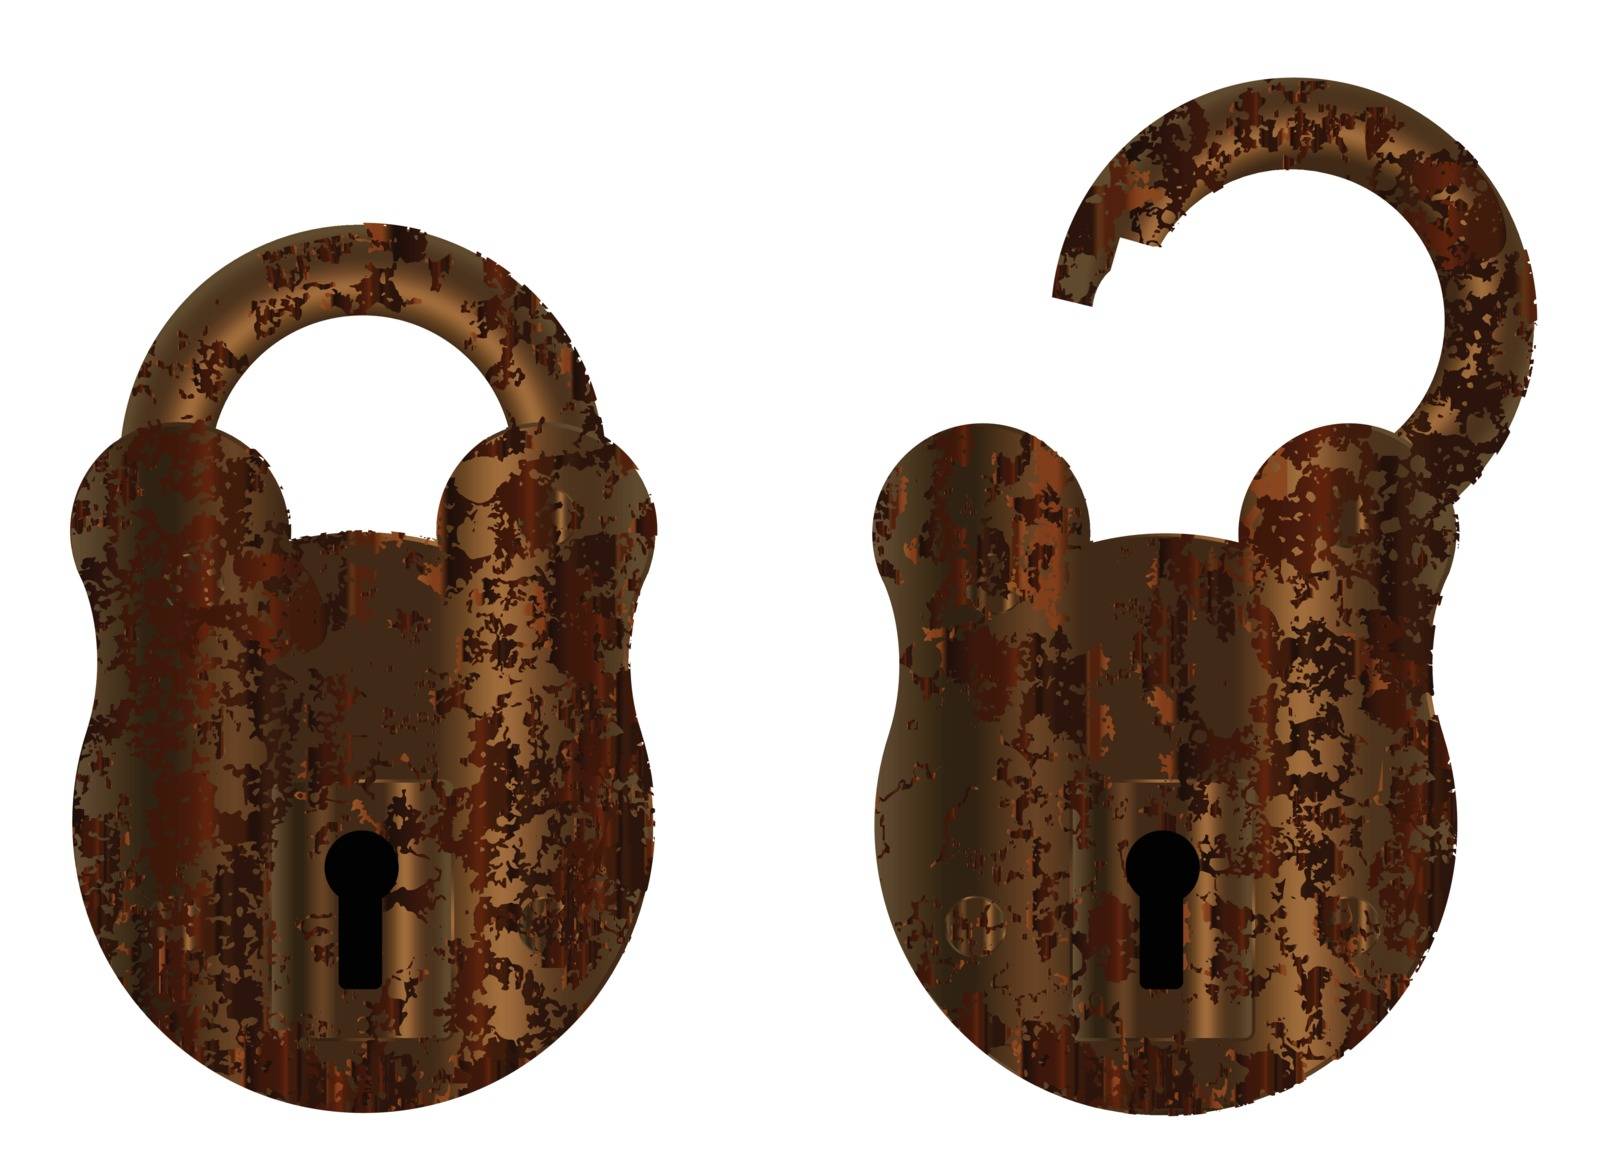 An old suted up padlock in open and close positions over a white background